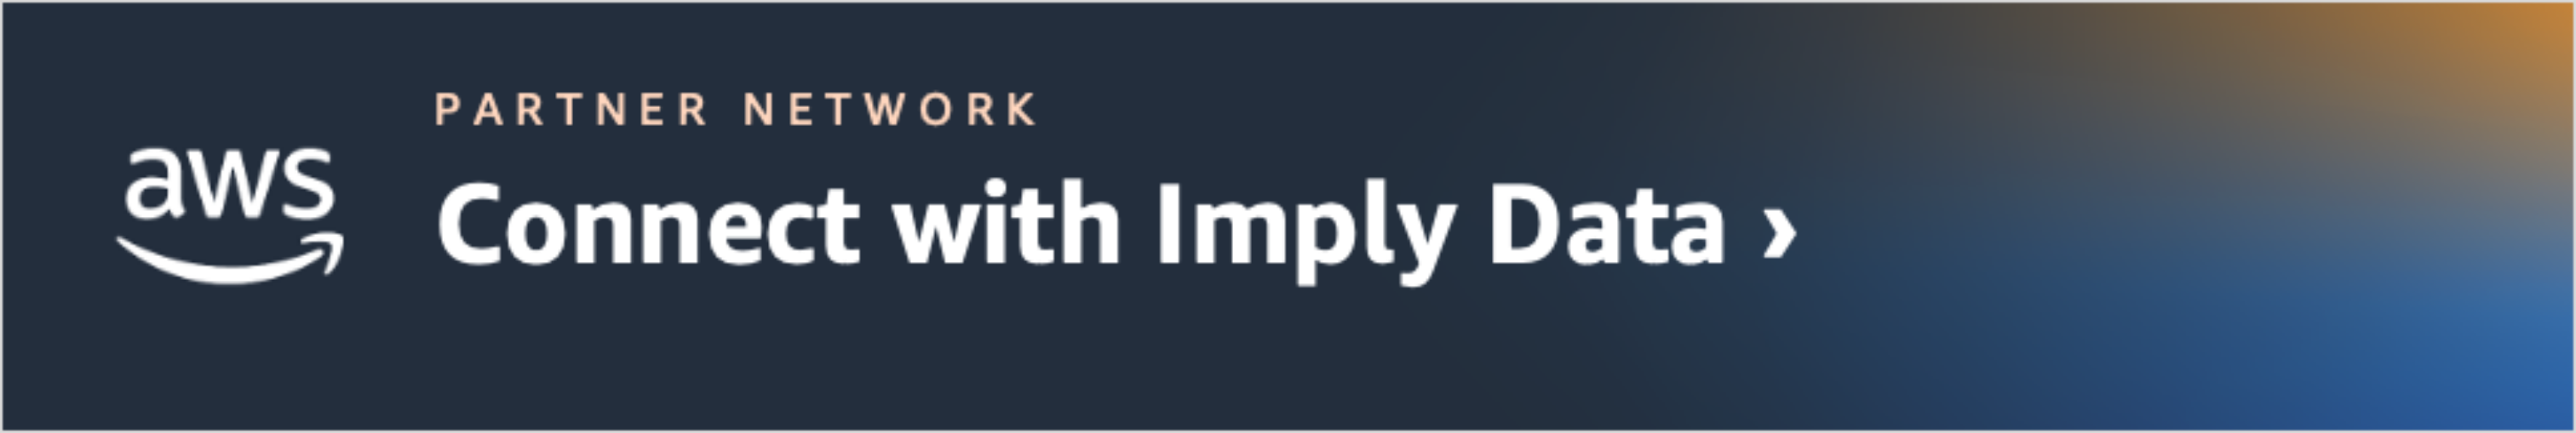 Imply Data Partner Connect